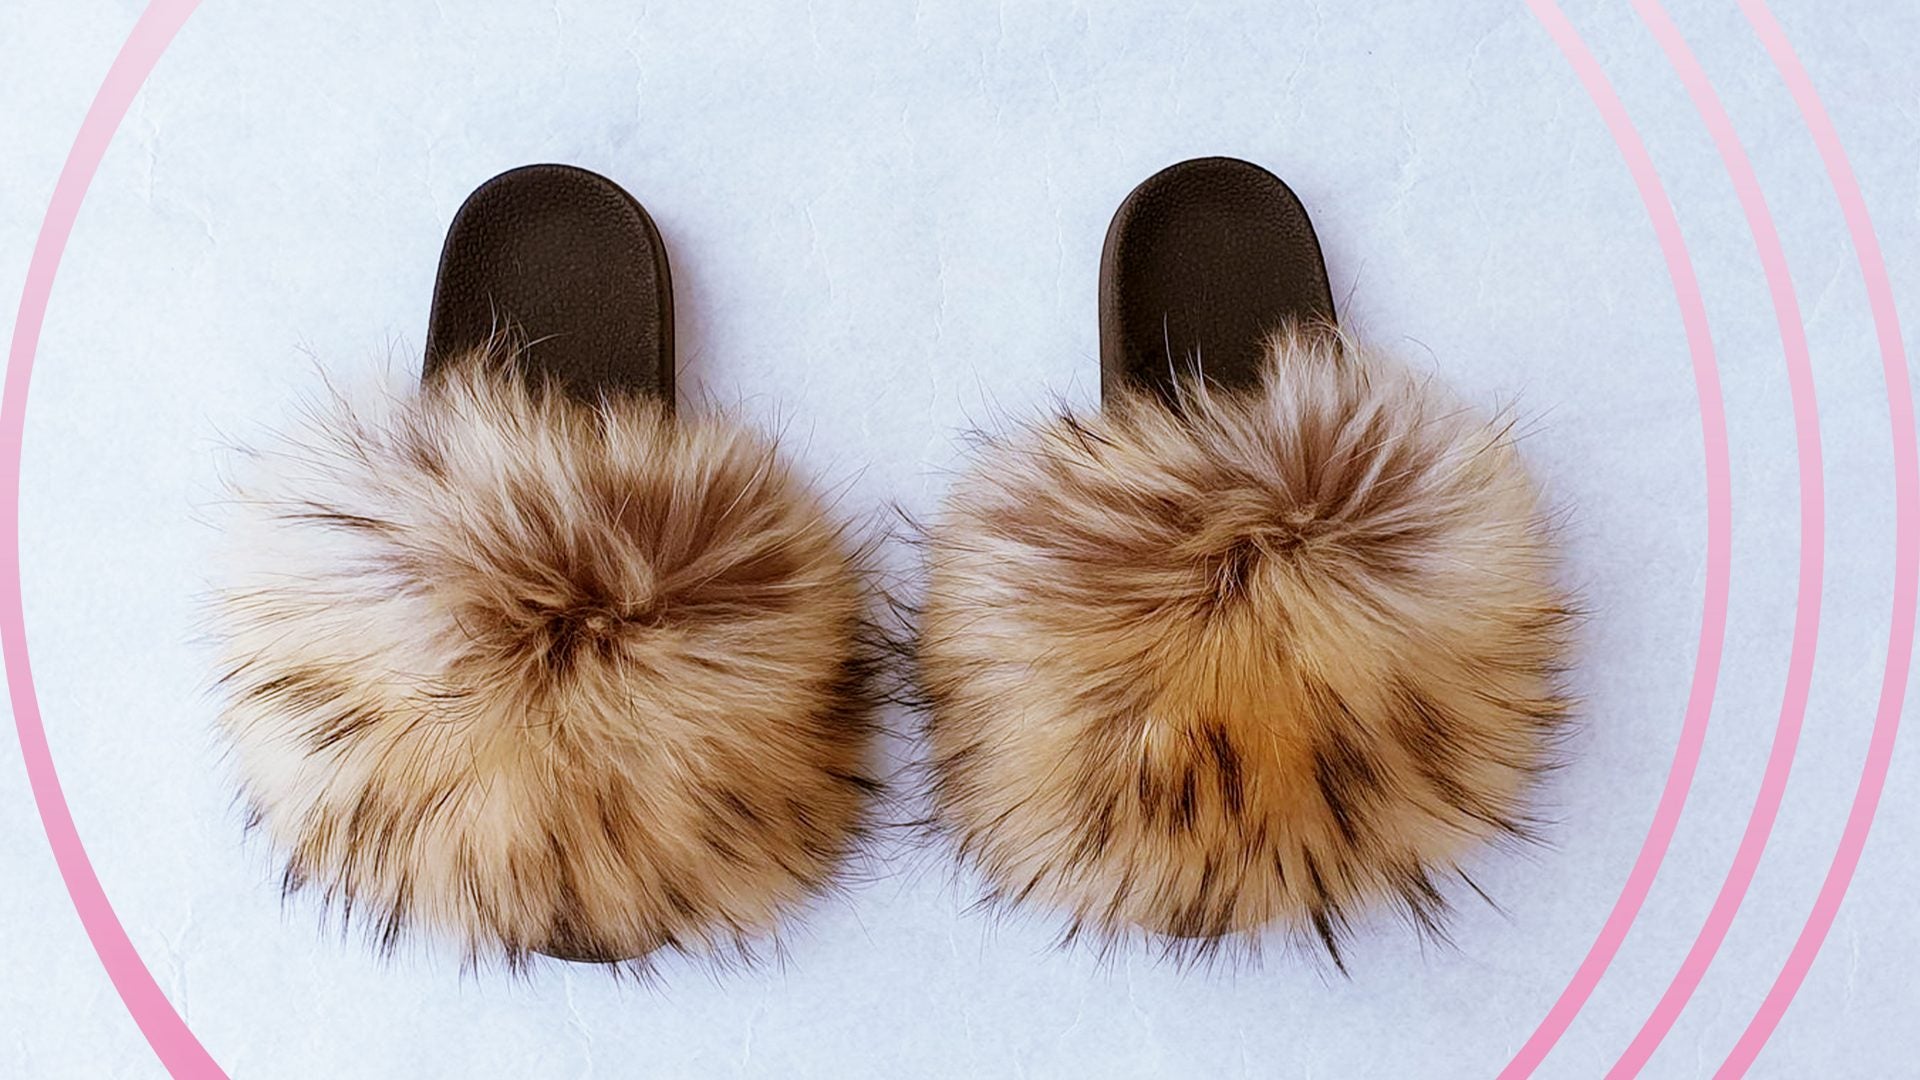 Trend Watch: The Chic And Comfy Slippers We’re Seeing Everywhere